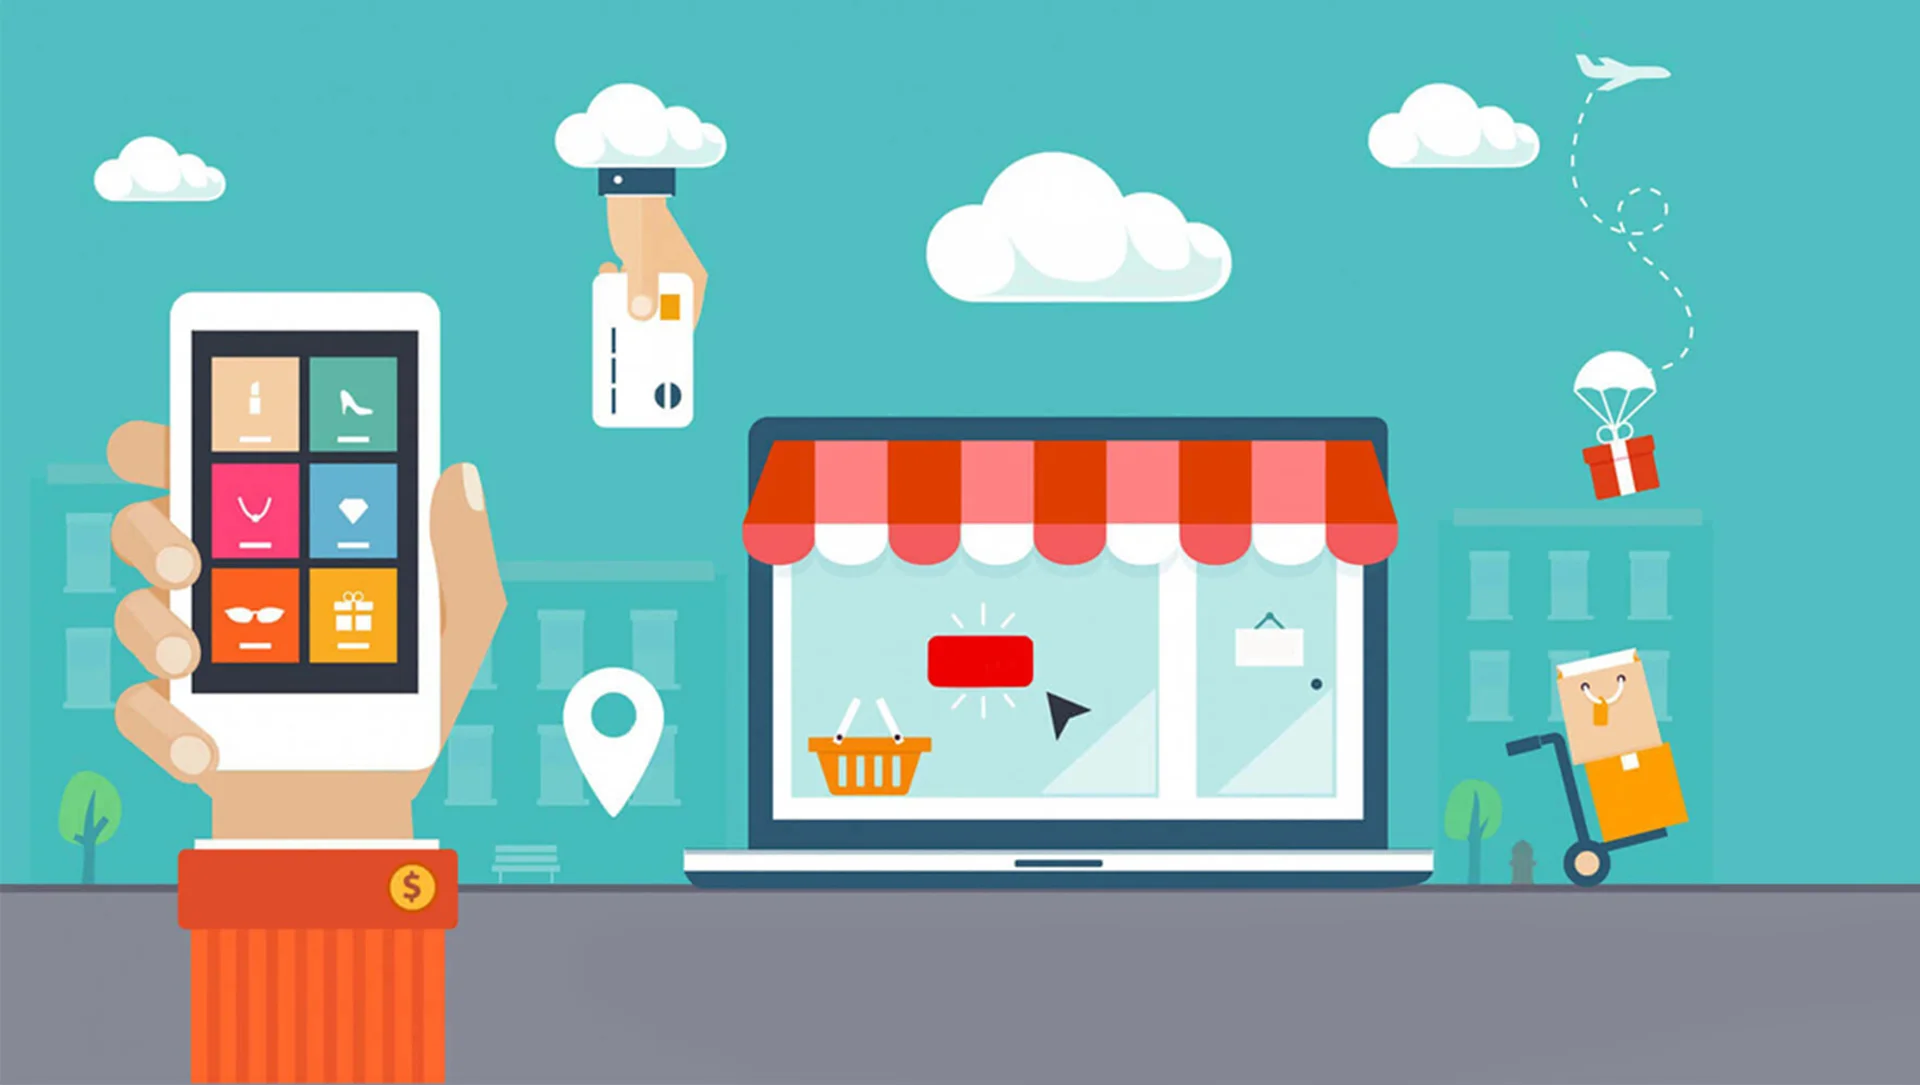 e-commerce-mobile-app-development-2022-know-the-features-trends-cost-related-blog-20